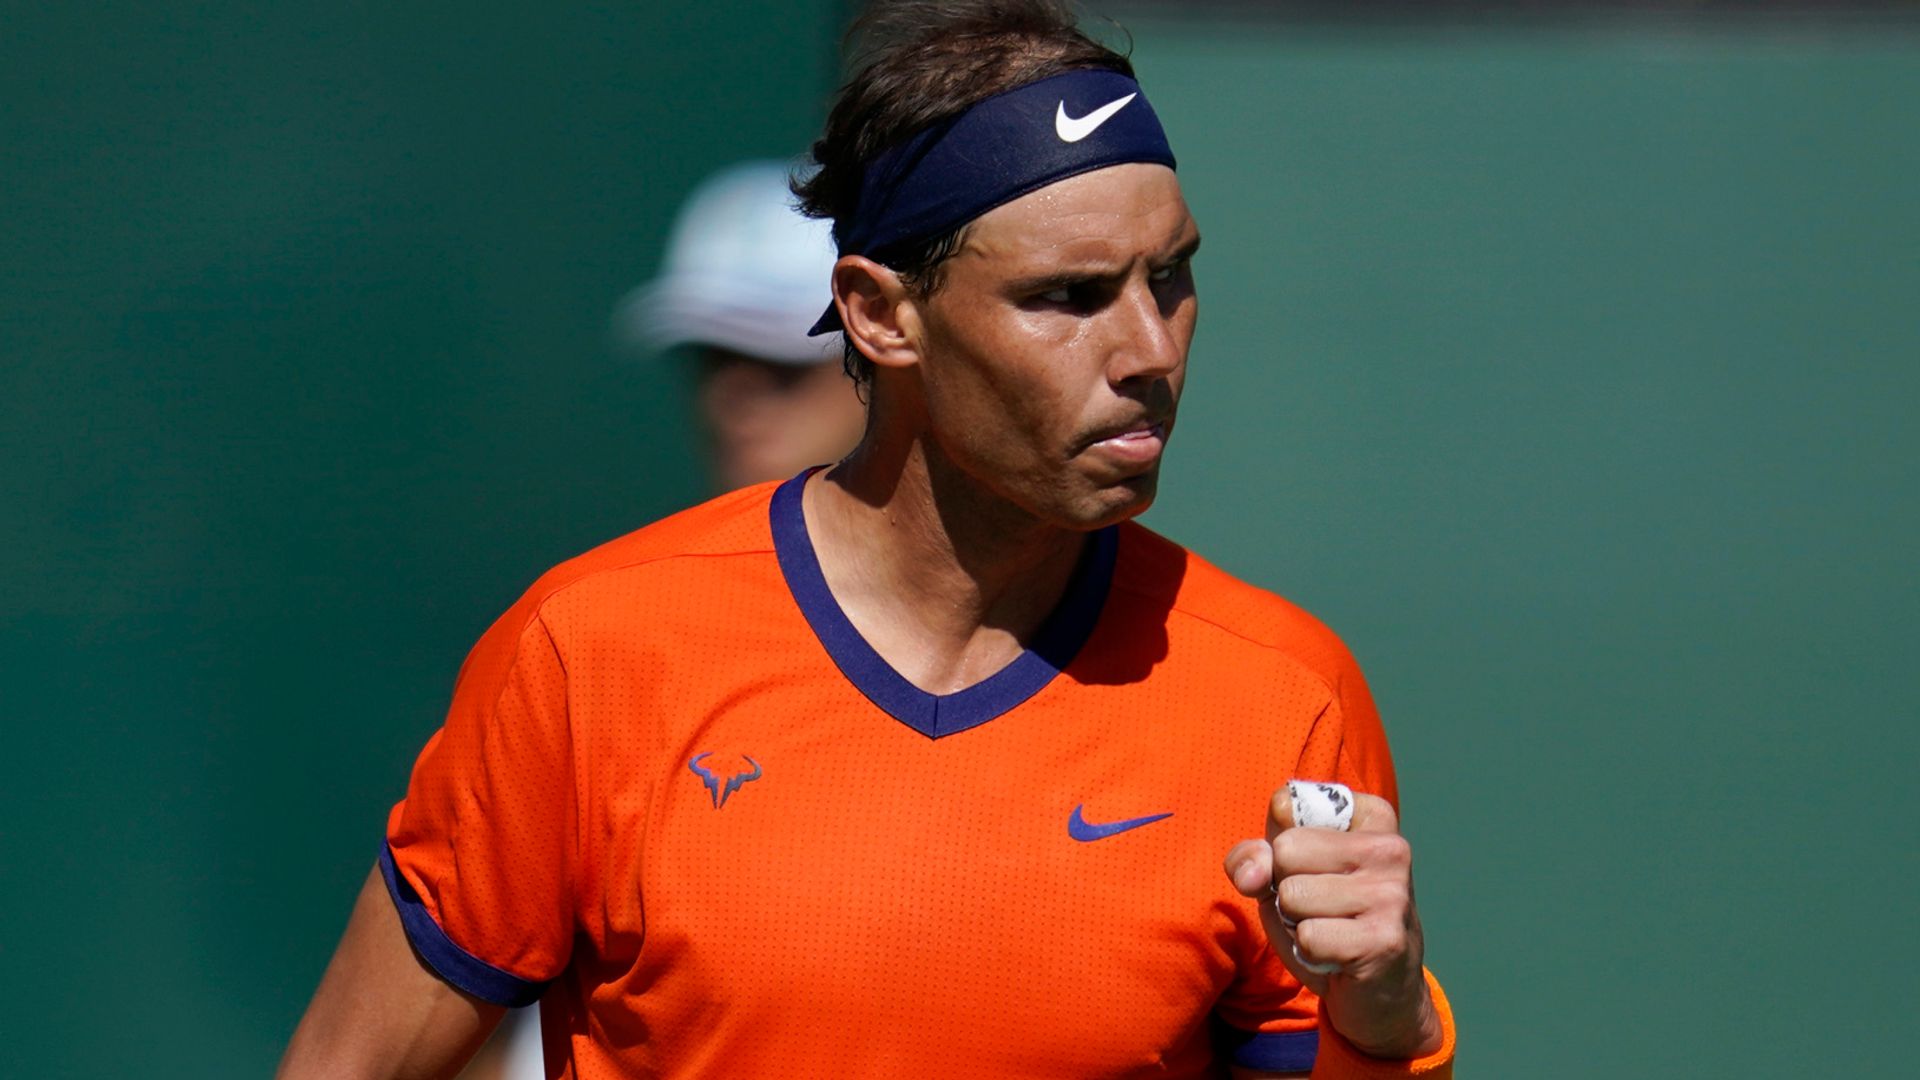 Nadal improves to 18-0 as he reaches Indian Wells quarter-finals